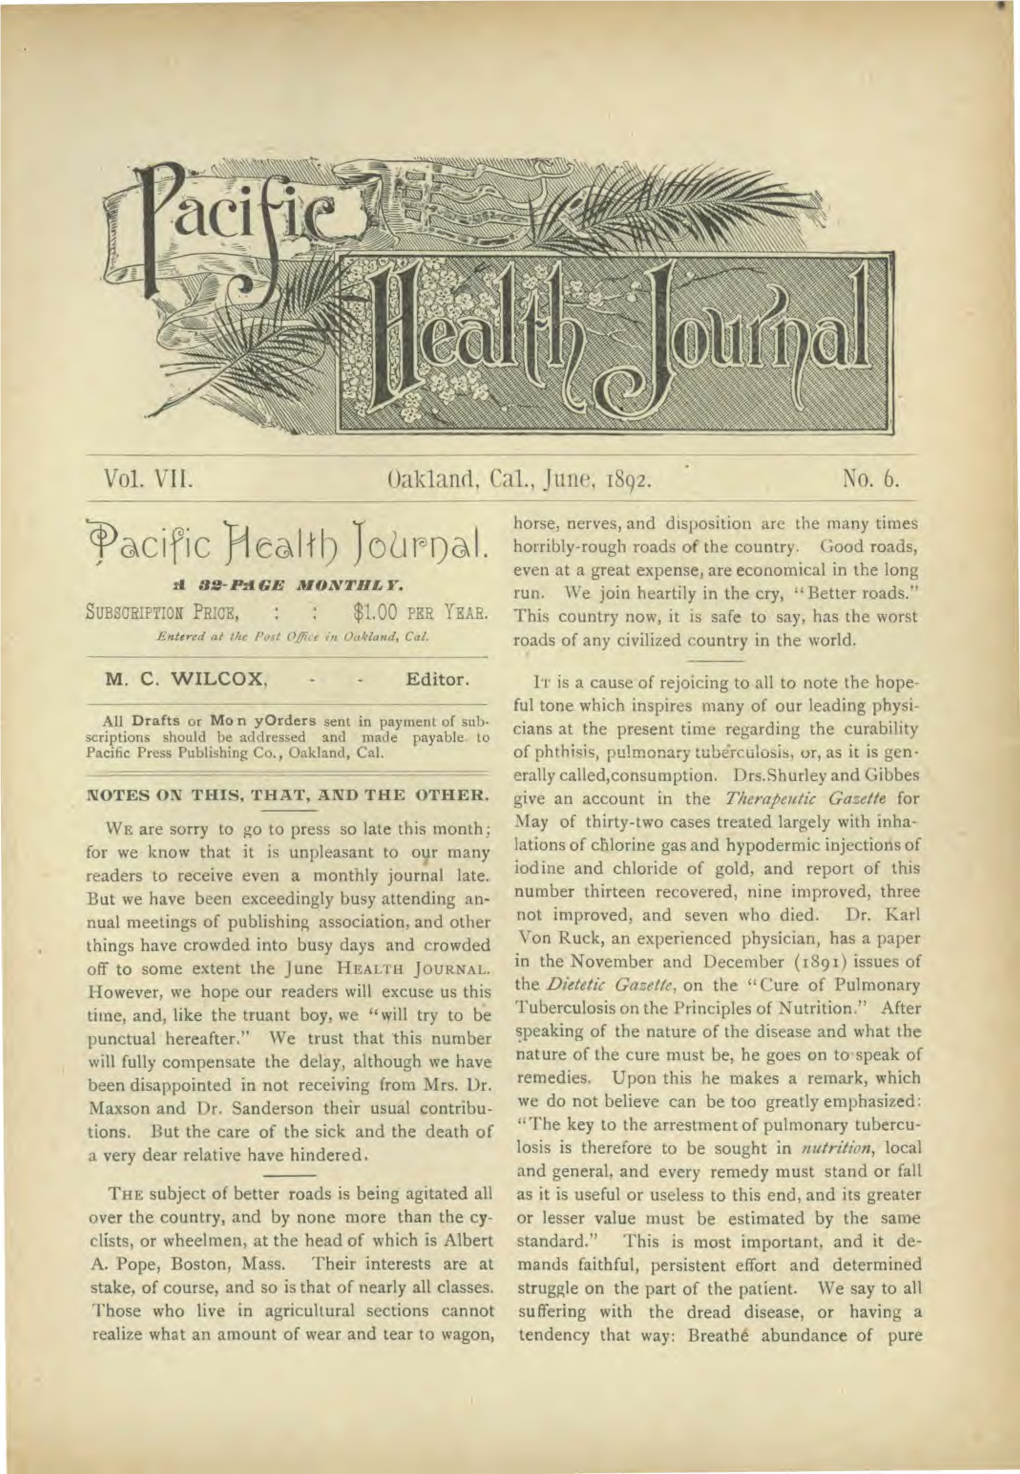 The Pacific Health Journal and Temperance Advocate for 1892